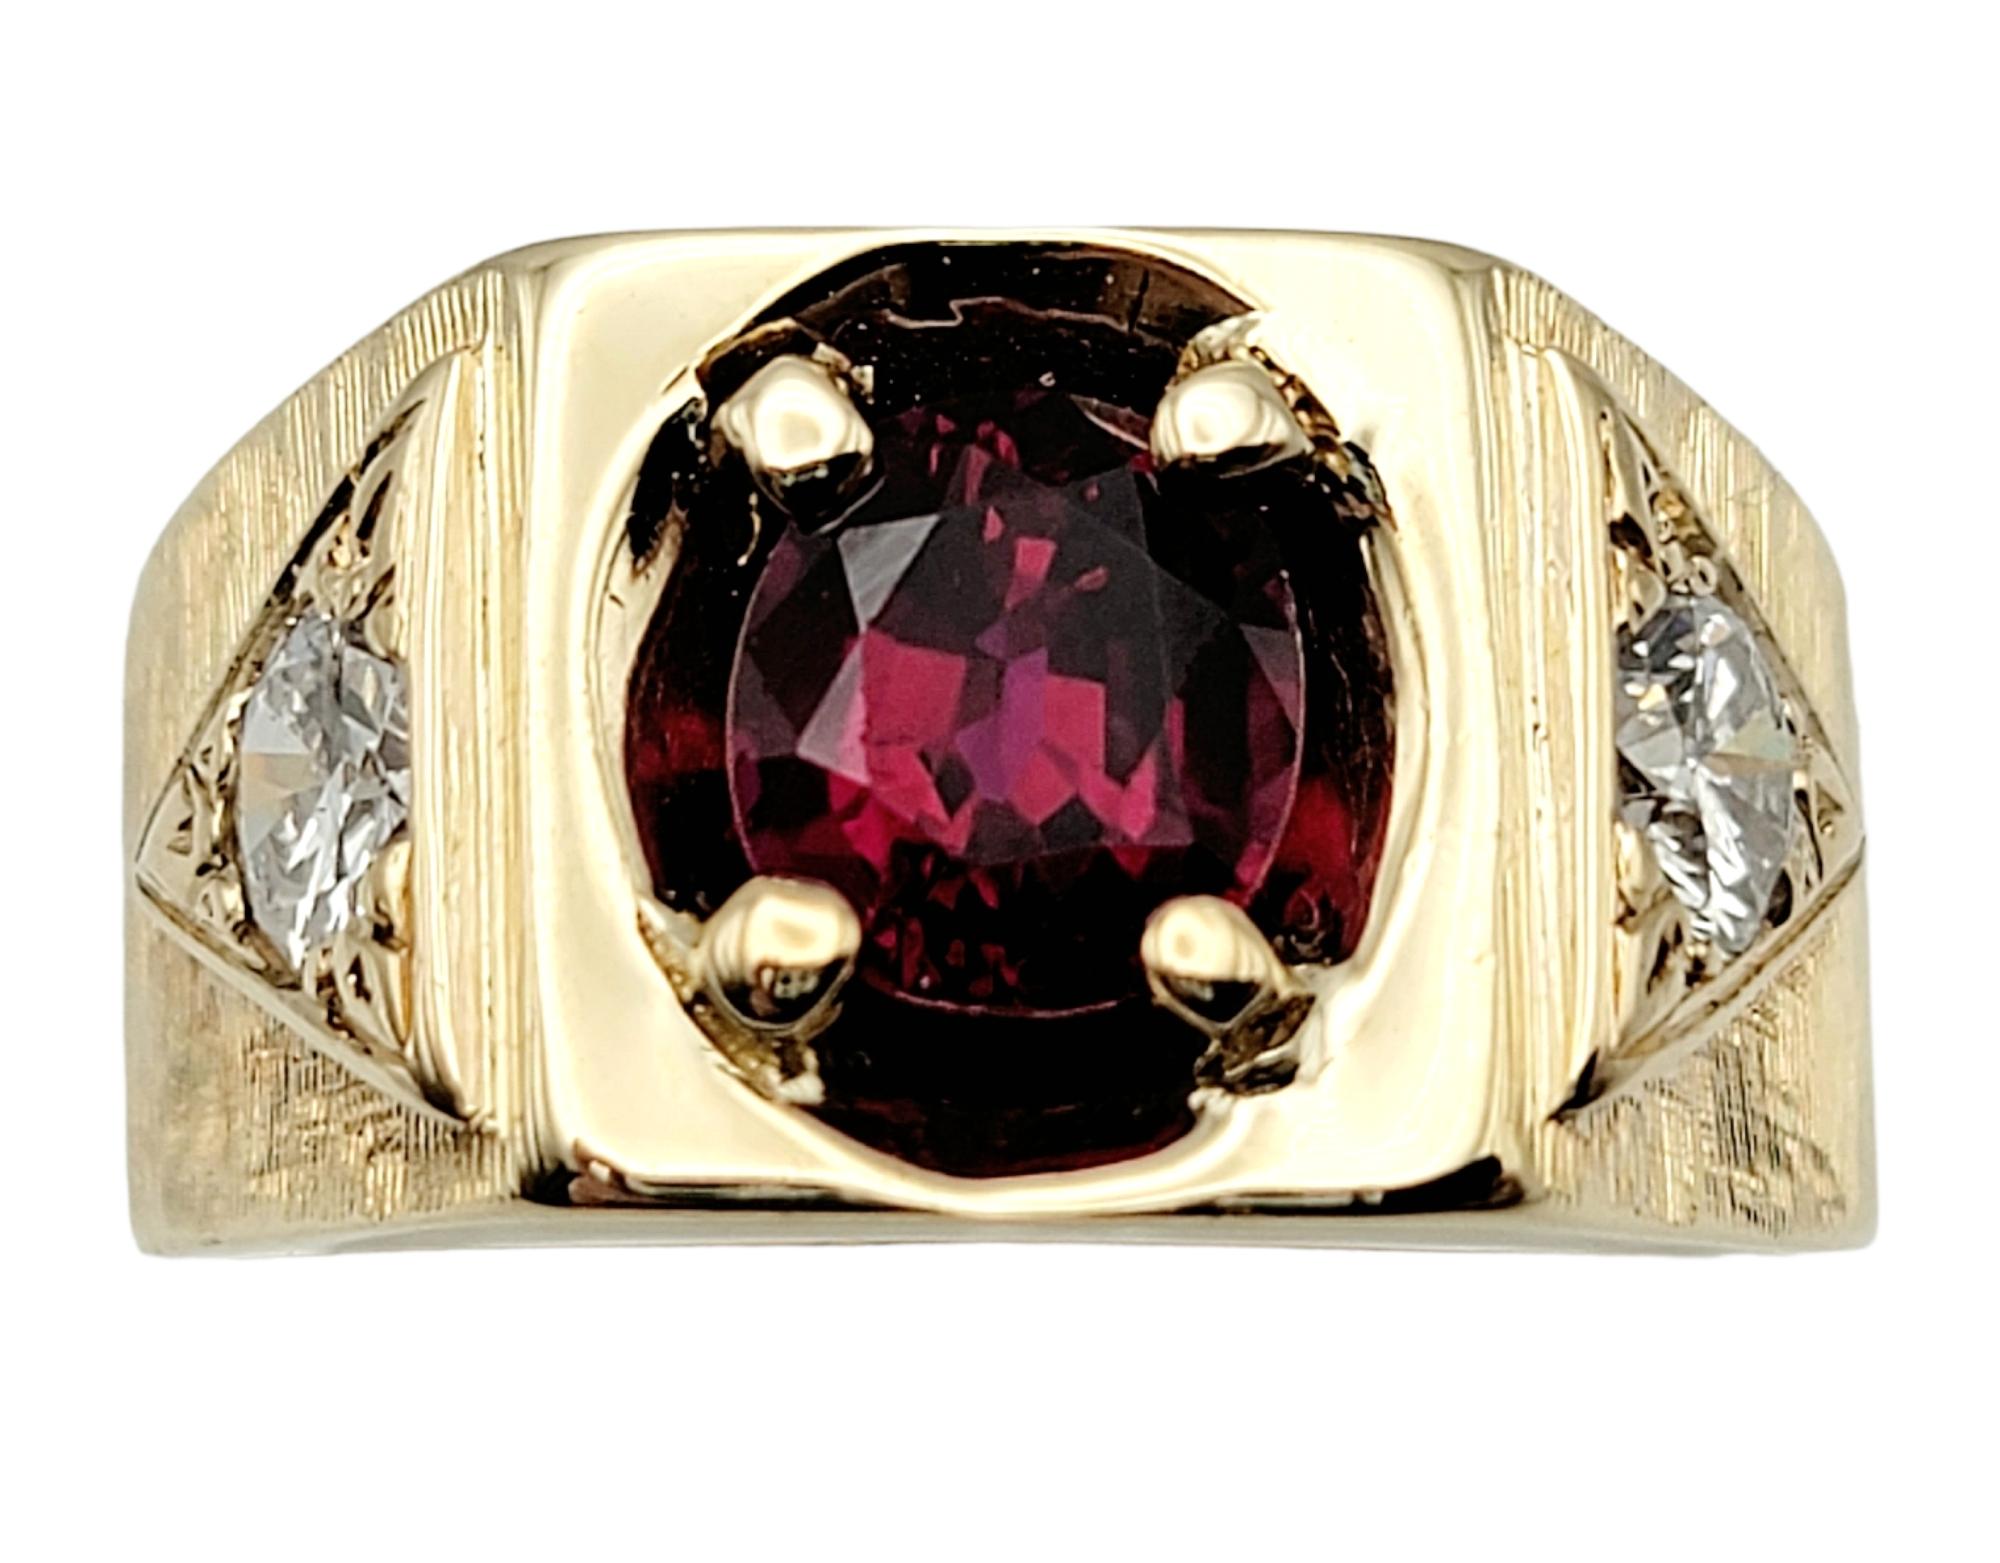 Ring size: 7.75

Bold and beautiful signet style unisex ring. The incredible red gemstone really pops, while the heavily textured brushed gold band adds to the elegant feel of the unique piece.  

This amazing ring features a single 1.60 carat oval